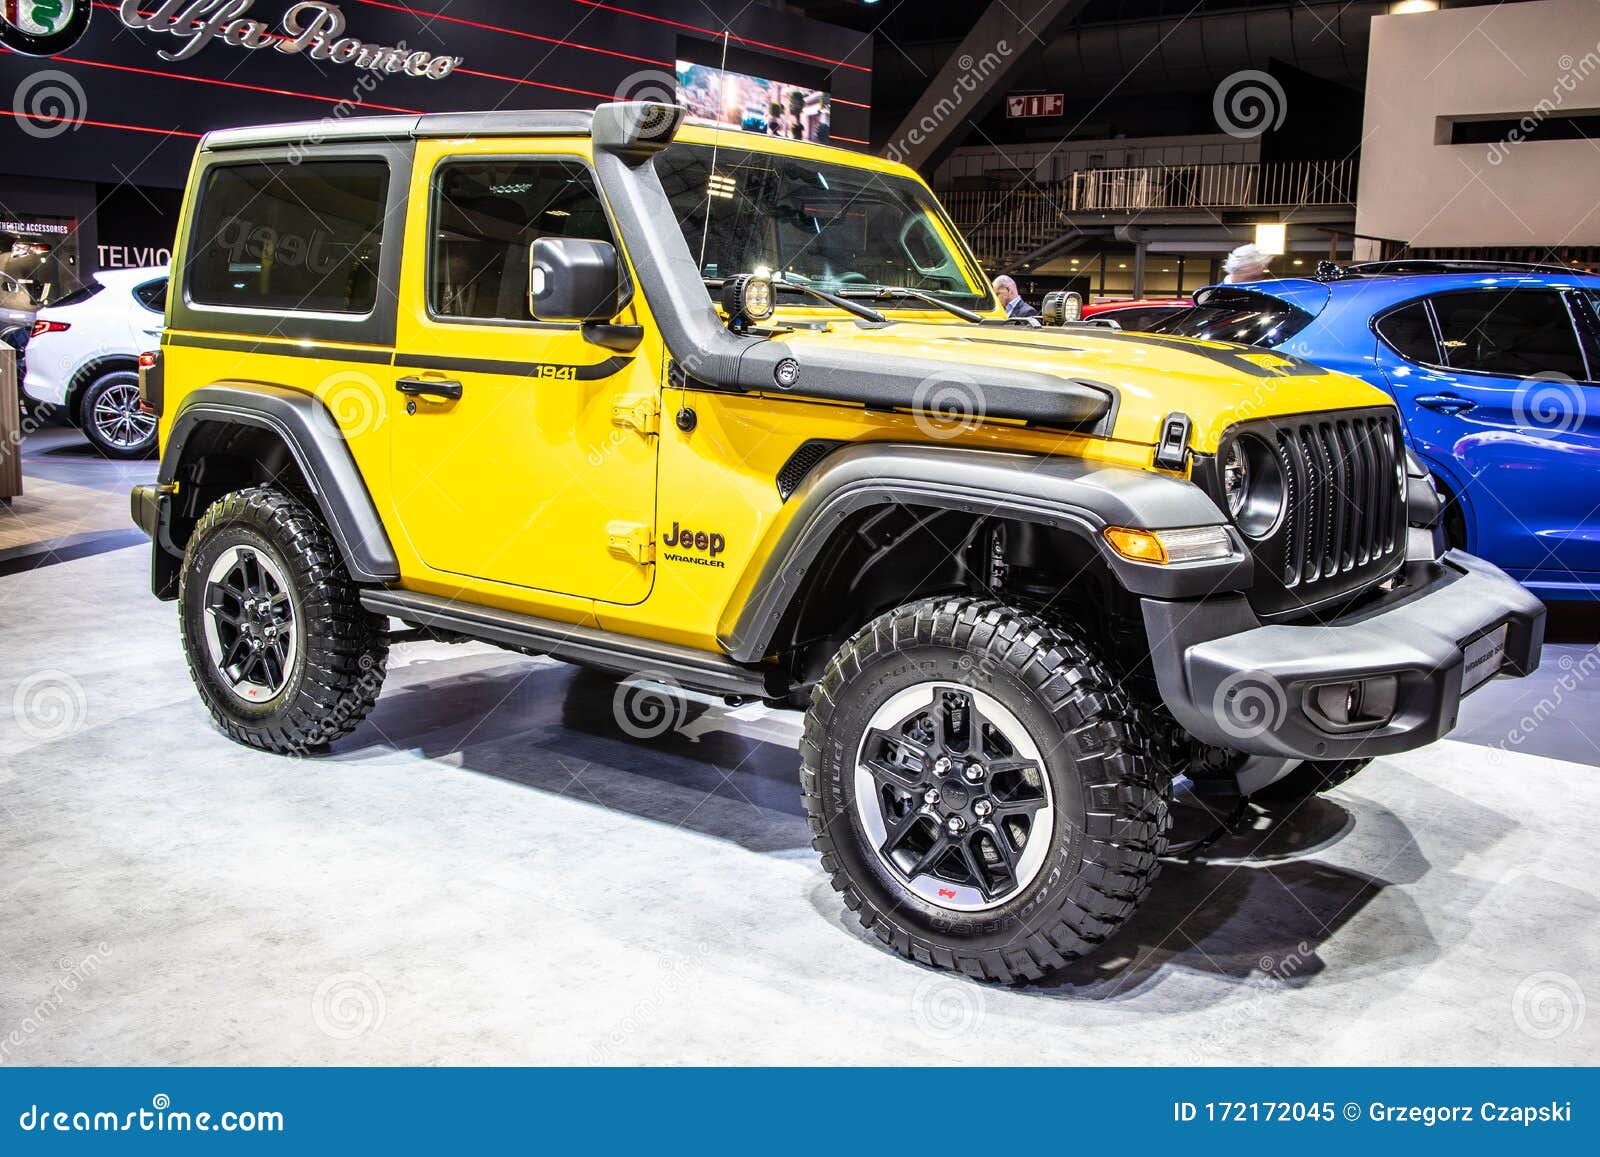 Jeep Wrangler 1941 Edition at Brussels Motor Show, Fourth Generation, JL, Four-wheel Off-road Jeep Vehicle Editorial Image - Image industry, auto: 172172045